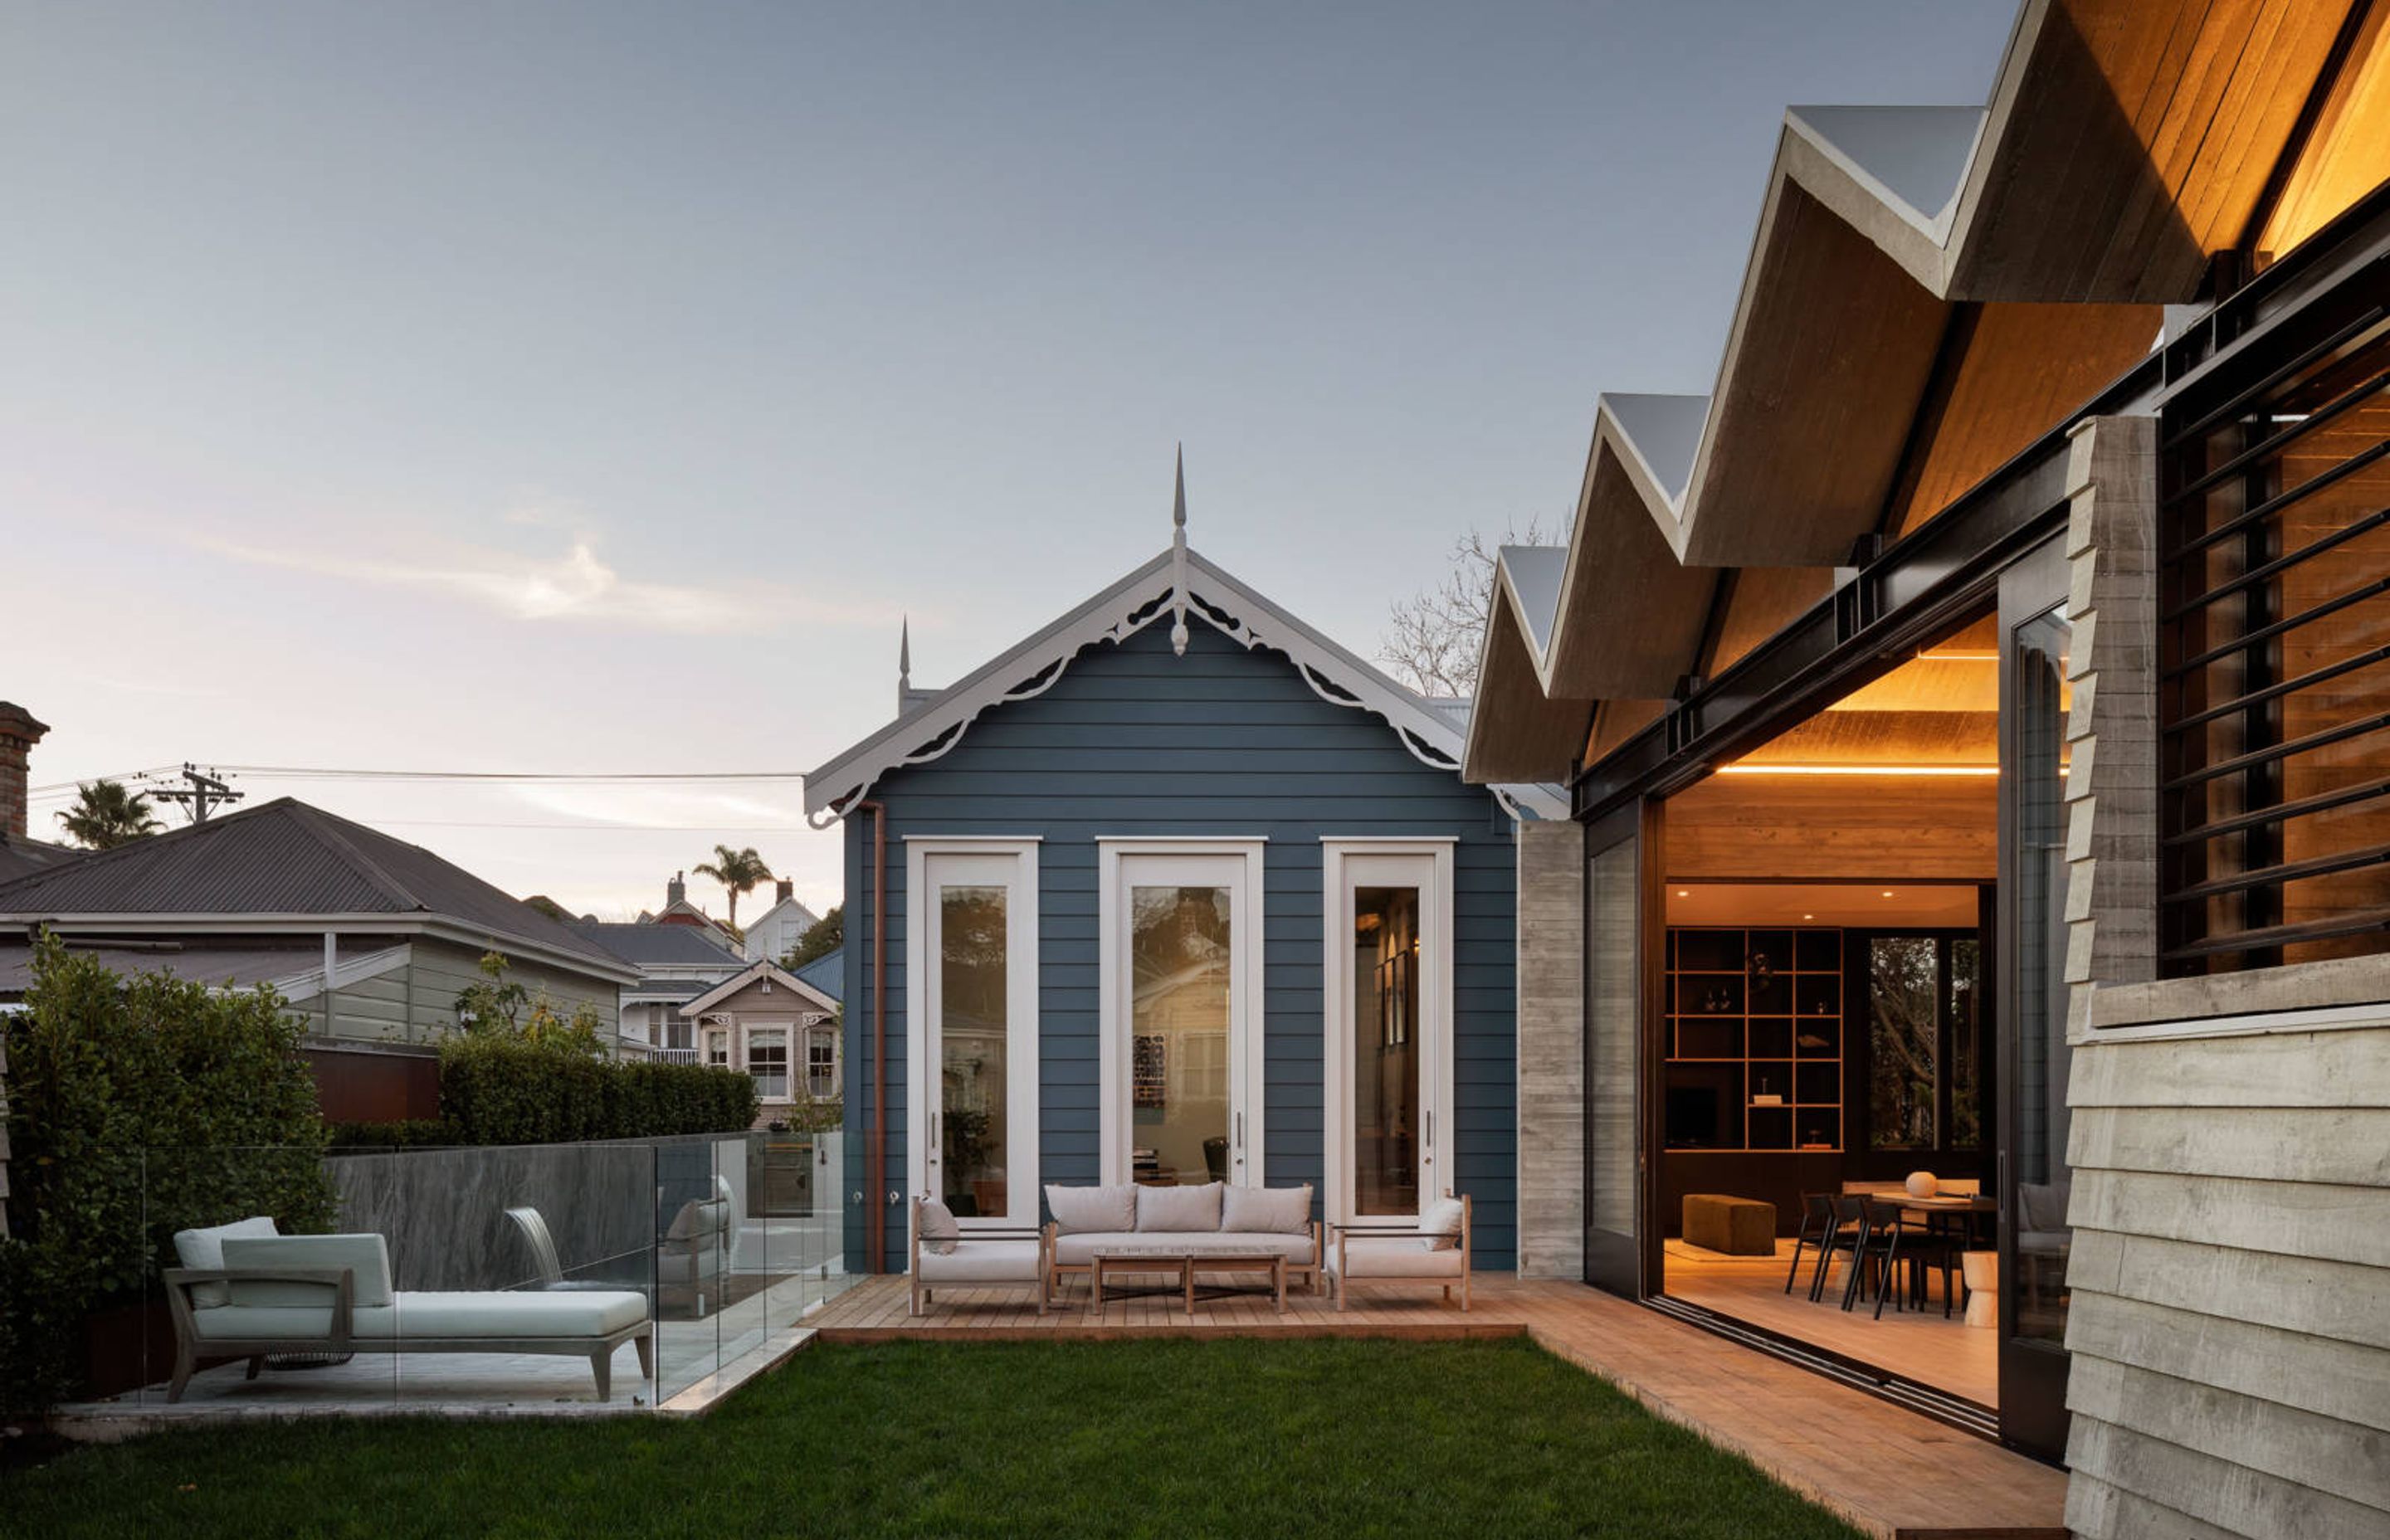 Poured Pleats by Jack McKinney Architects is a heritage villa with a traditional gable that has been mimicked in its striking new addition that reflects the gabled rooflines of its Ponsonby neighbourhood. Photography by David Straight.